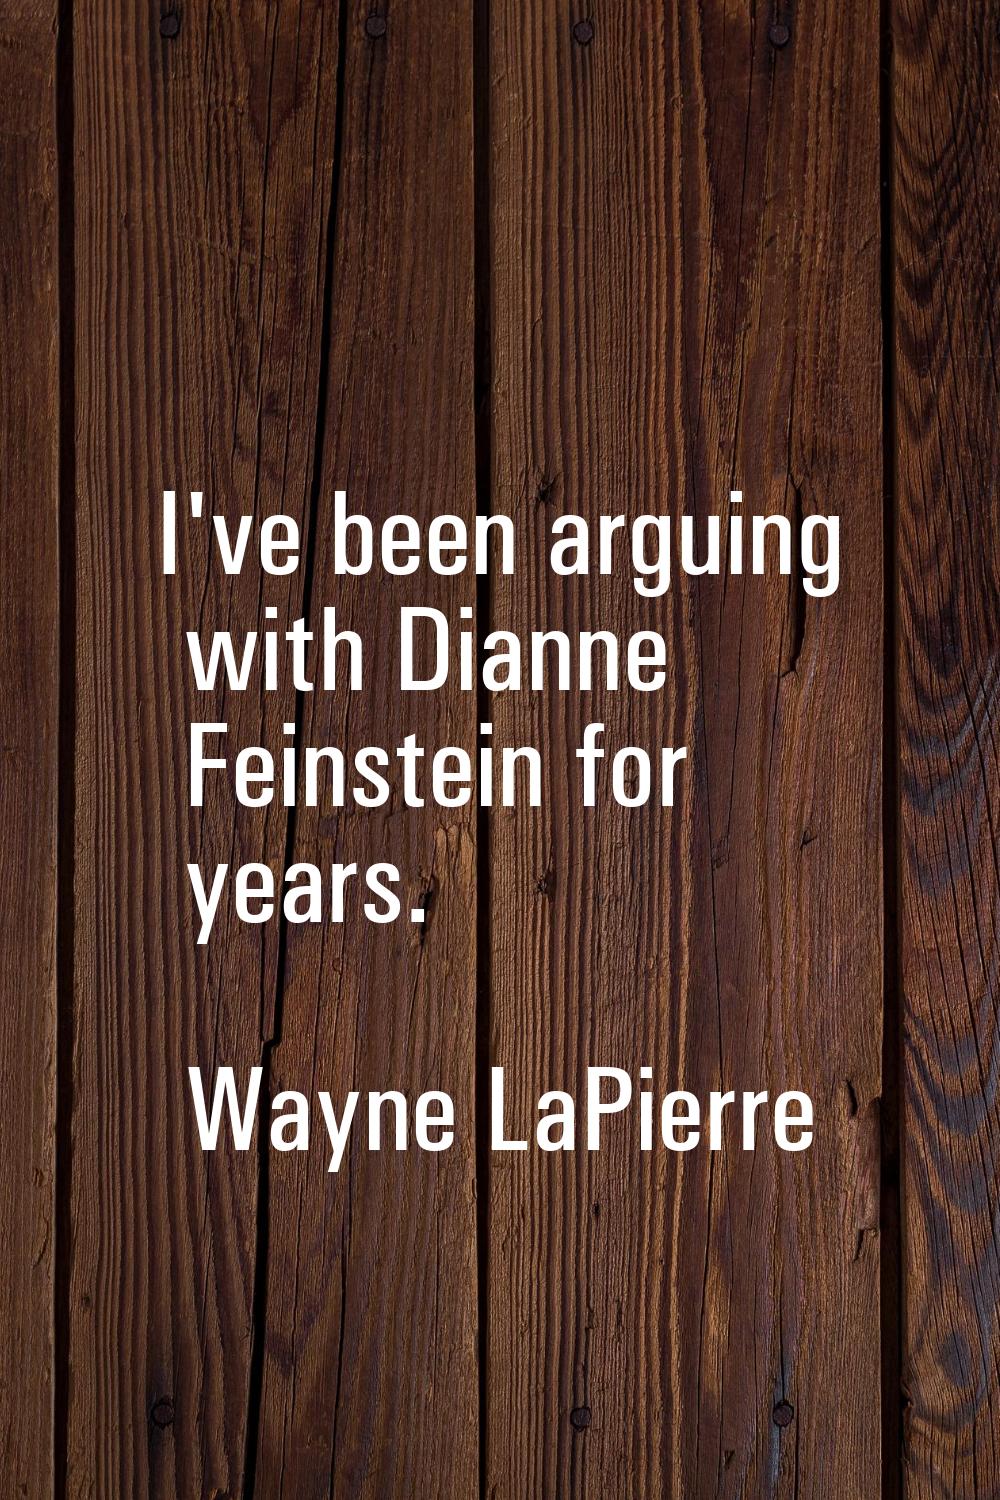 I've been arguing with Dianne Feinstein for years.